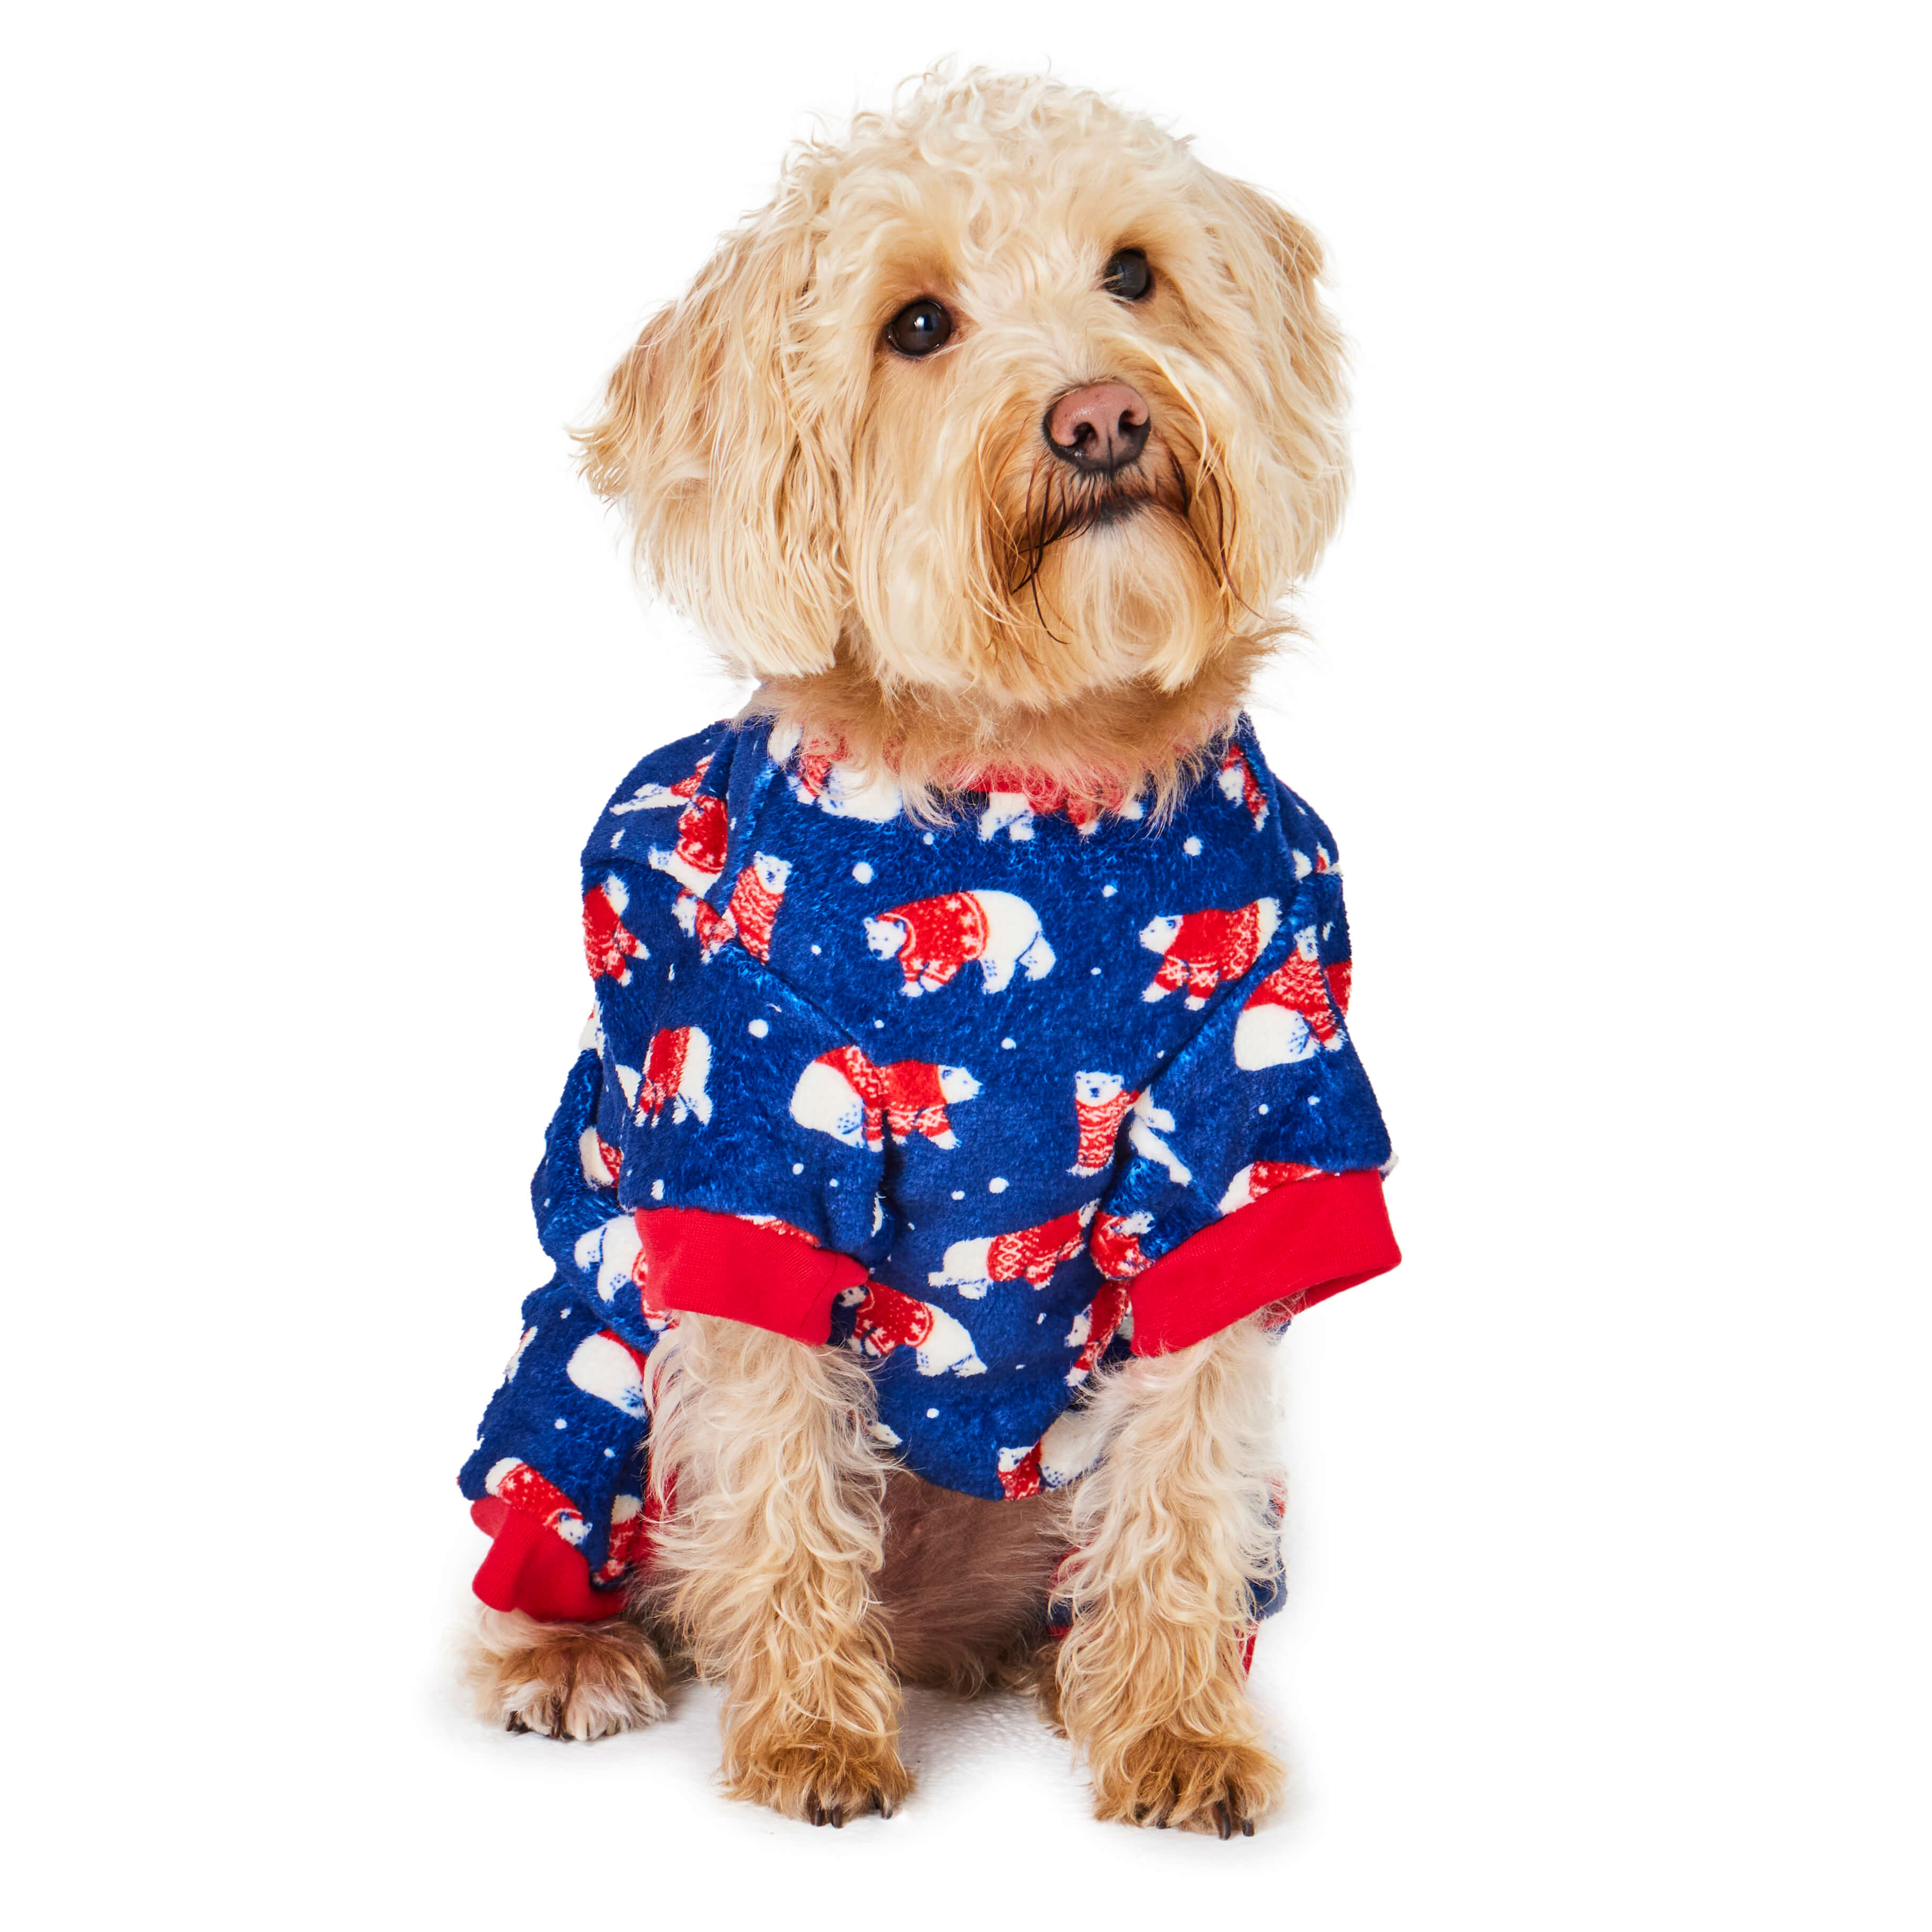 Dog wearing festive navy pjs. Front view